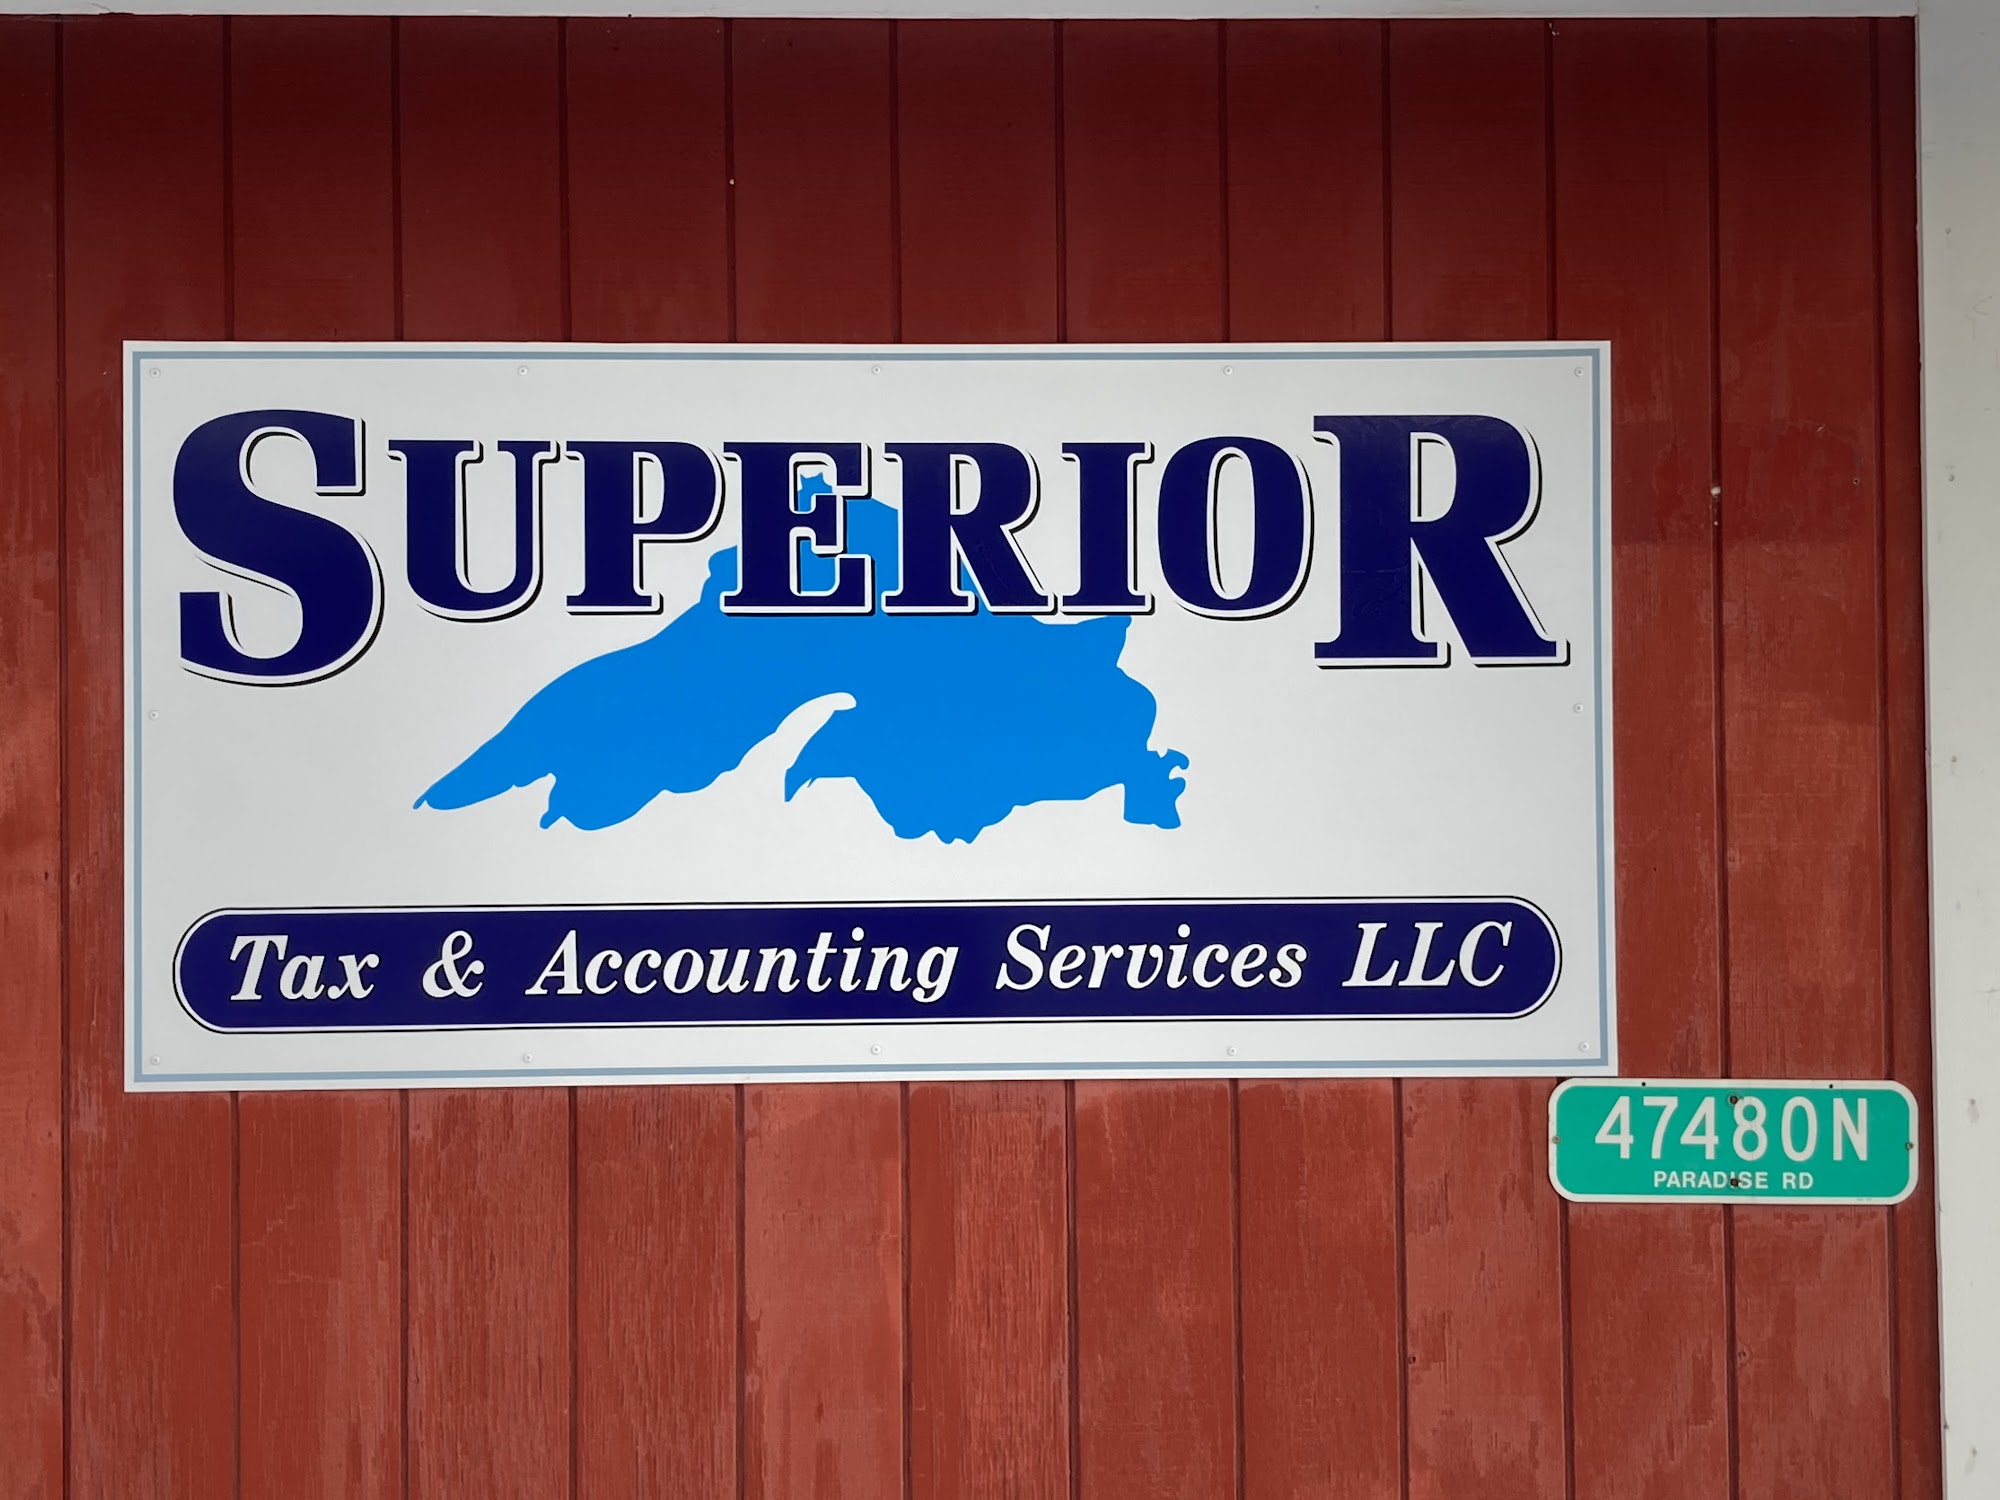 Superior Tax & Accounting Services LLC 47480 Paradise Rd, Houghton Michigan 49931